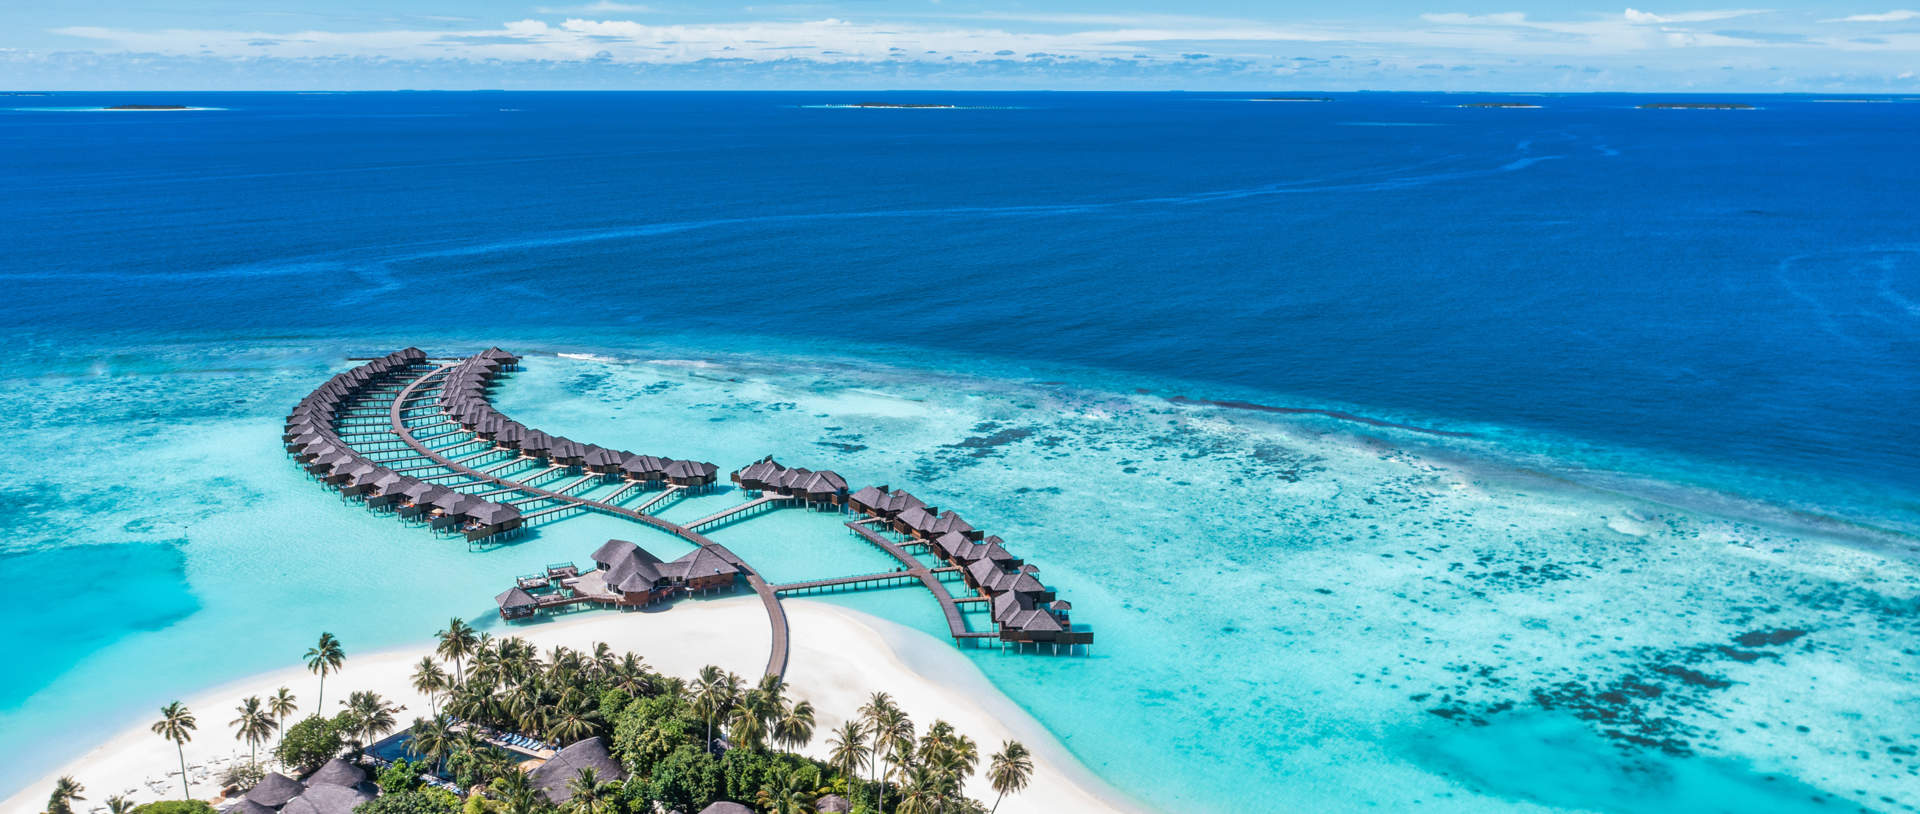 Tropical Aerial Landscape Of Island In The Maldives